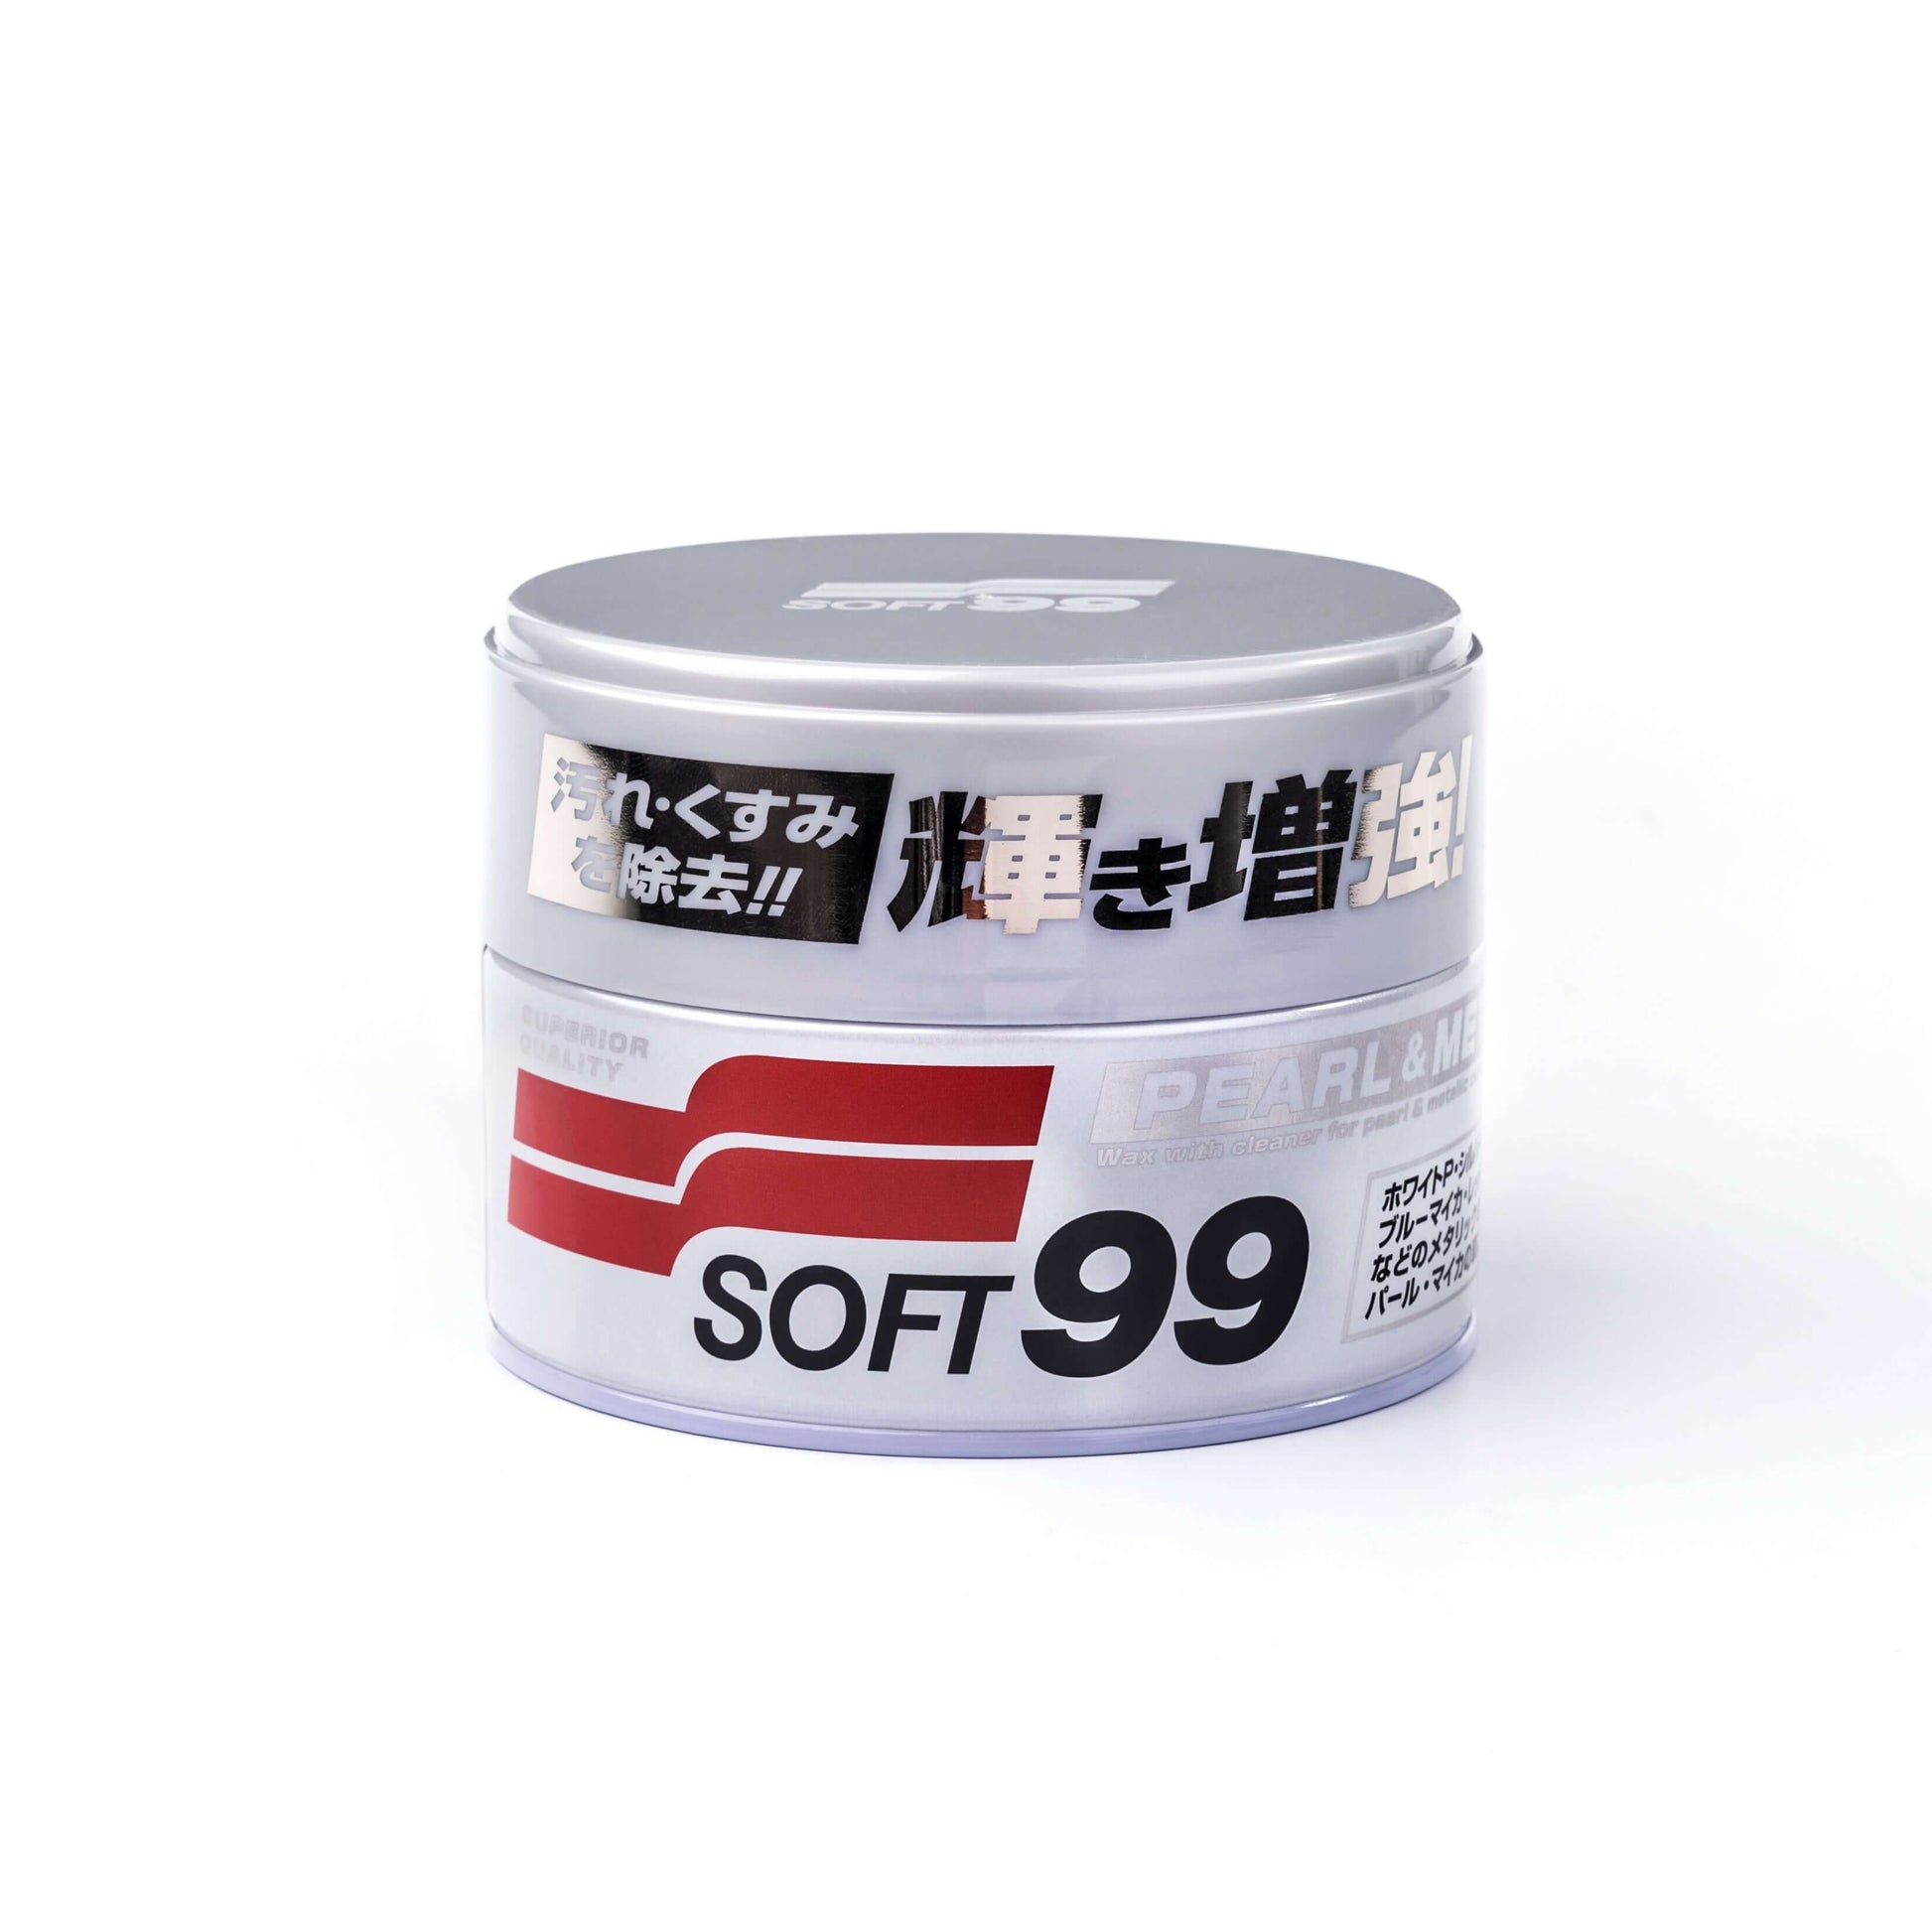 Soft99 – Wax for Pearl & Metallic paintwork 